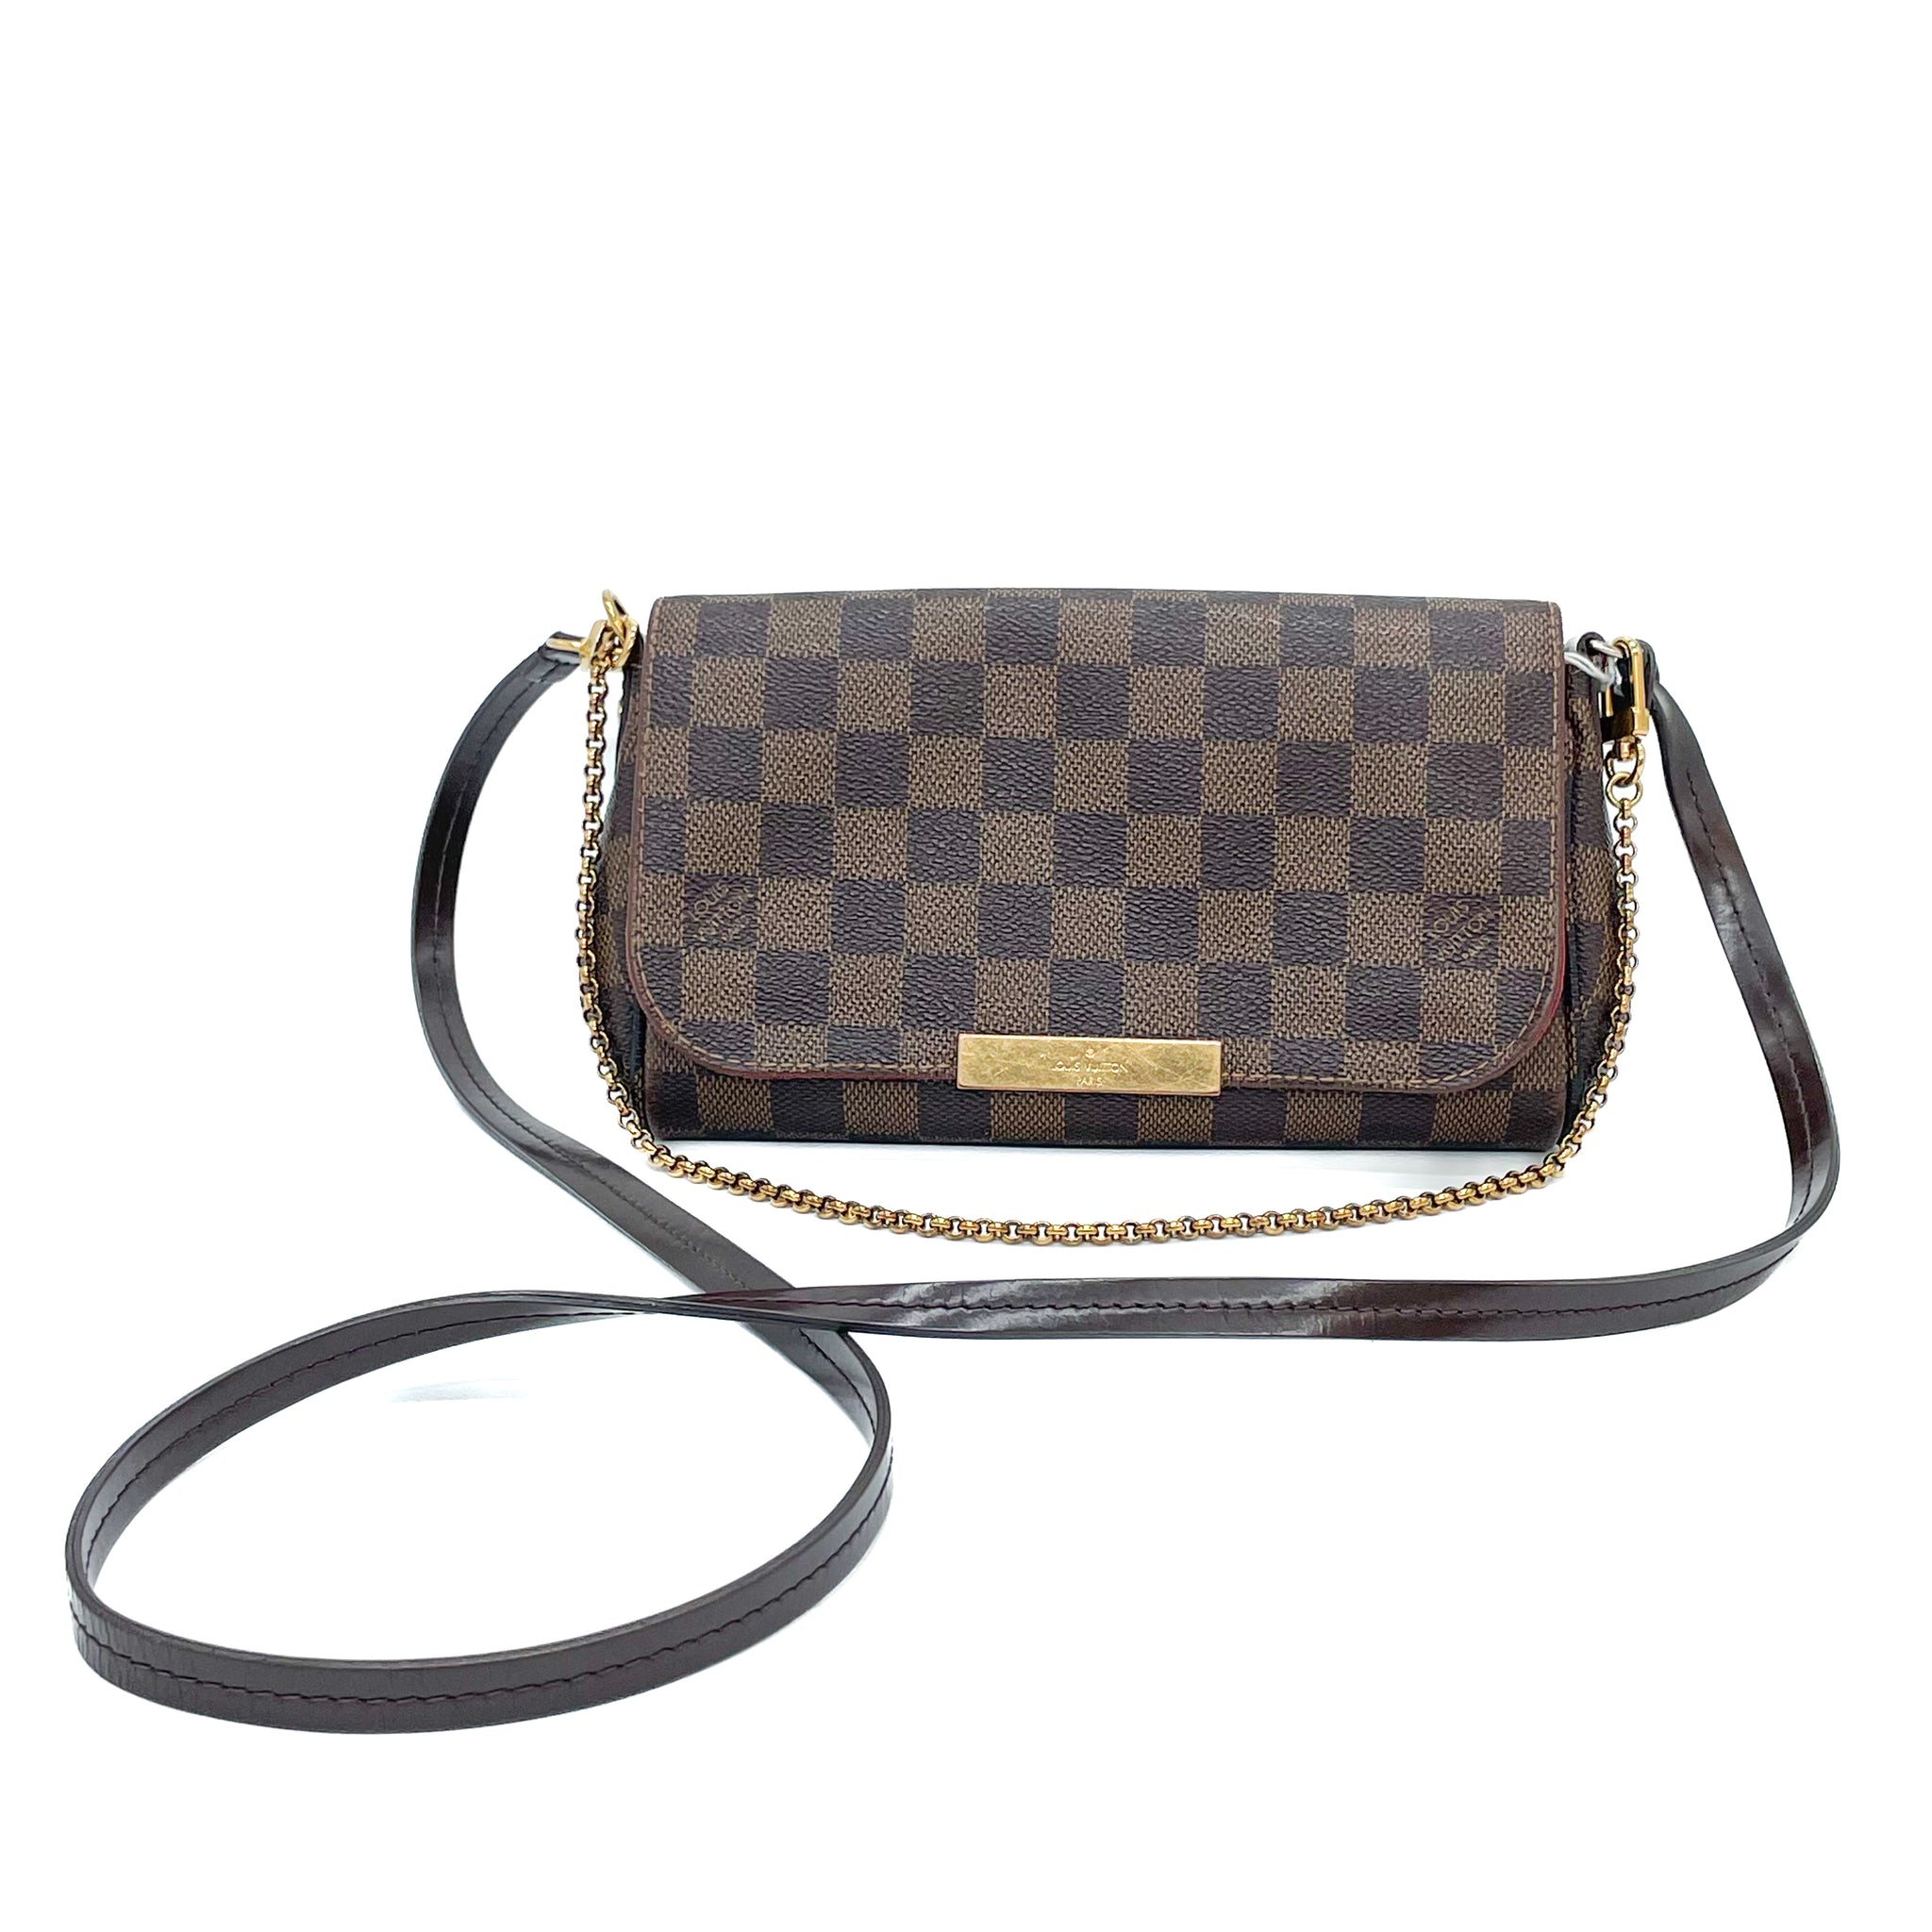 WIN a beautiful luxury Louis Vuitton Favorite MM bag valued at 1500 from  Votre Luxe  Adelady